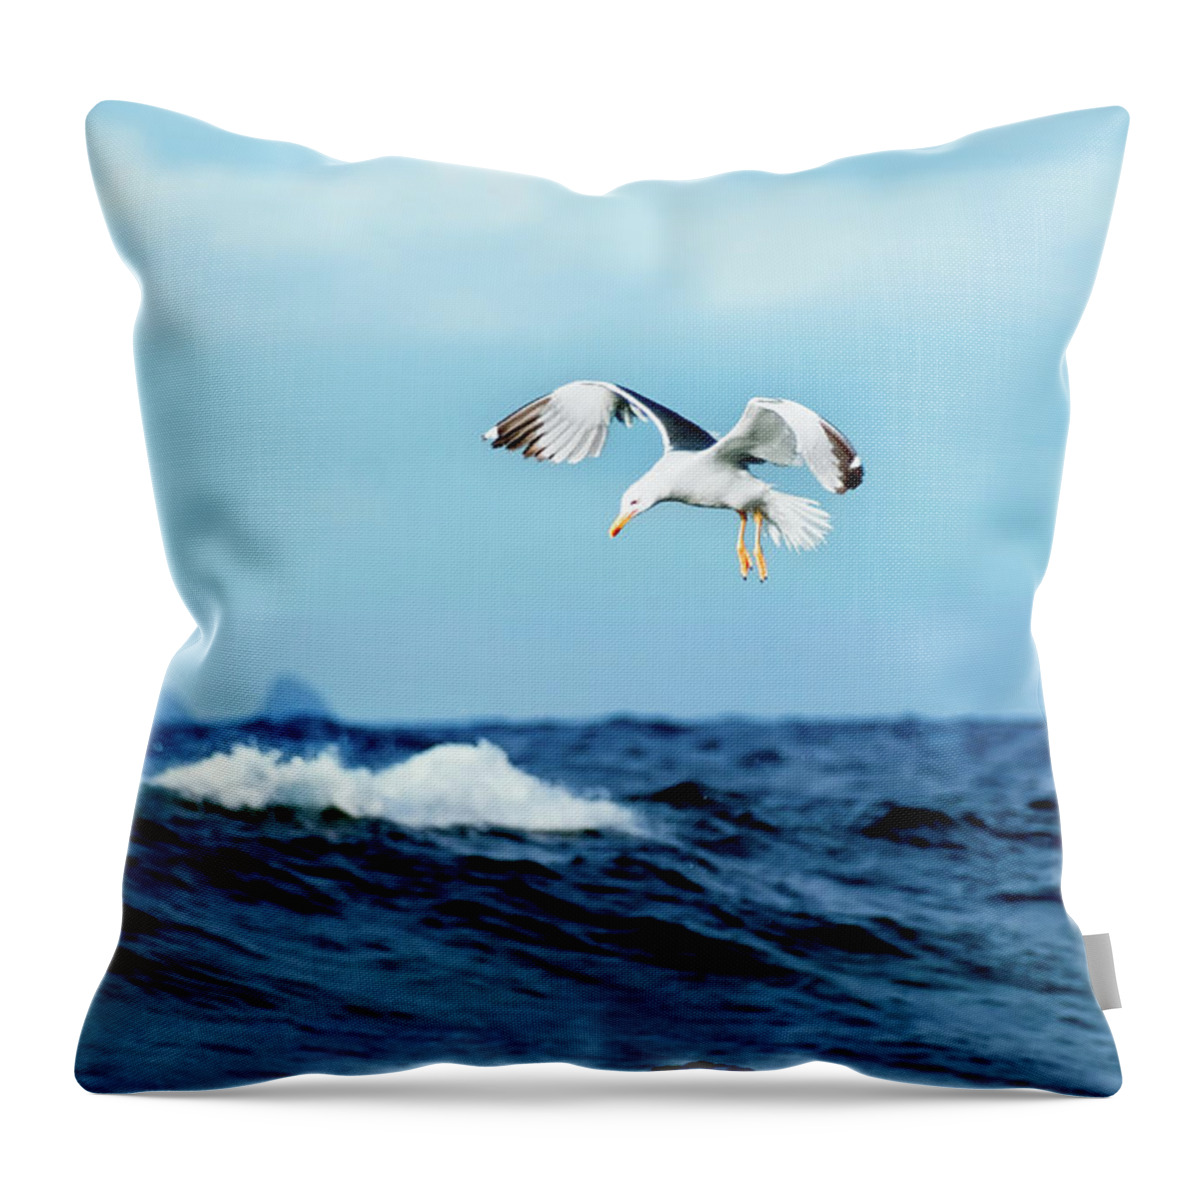 Animal Themes Throw Pillow featuring the photograph Seagull by J.d. Rguez. Hdez.